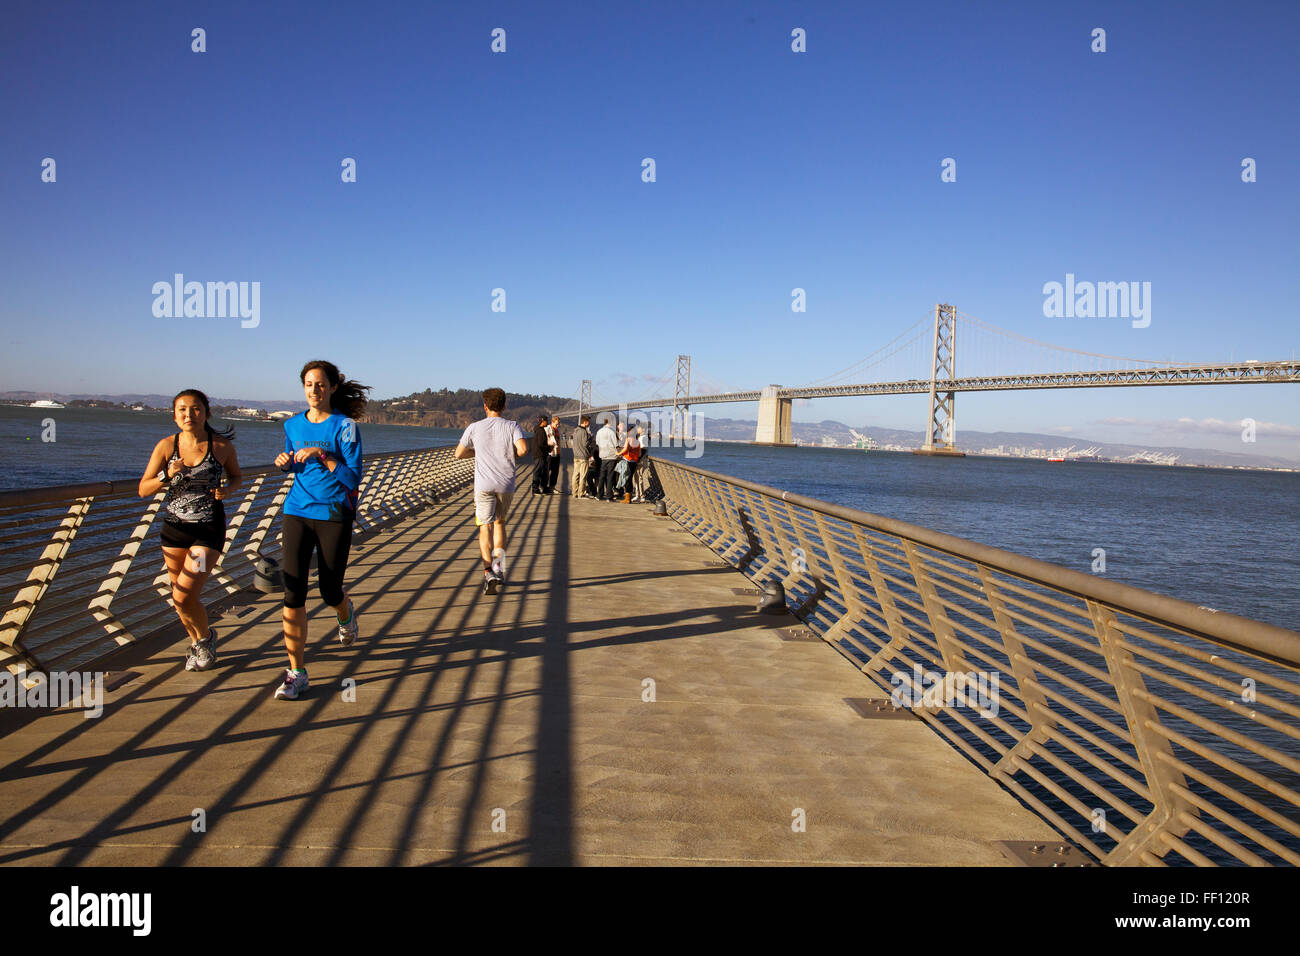 People jogging along San Francisco's Pier 14 on a sunny afternoon with the Bay Bridge in the background. Stock Photo